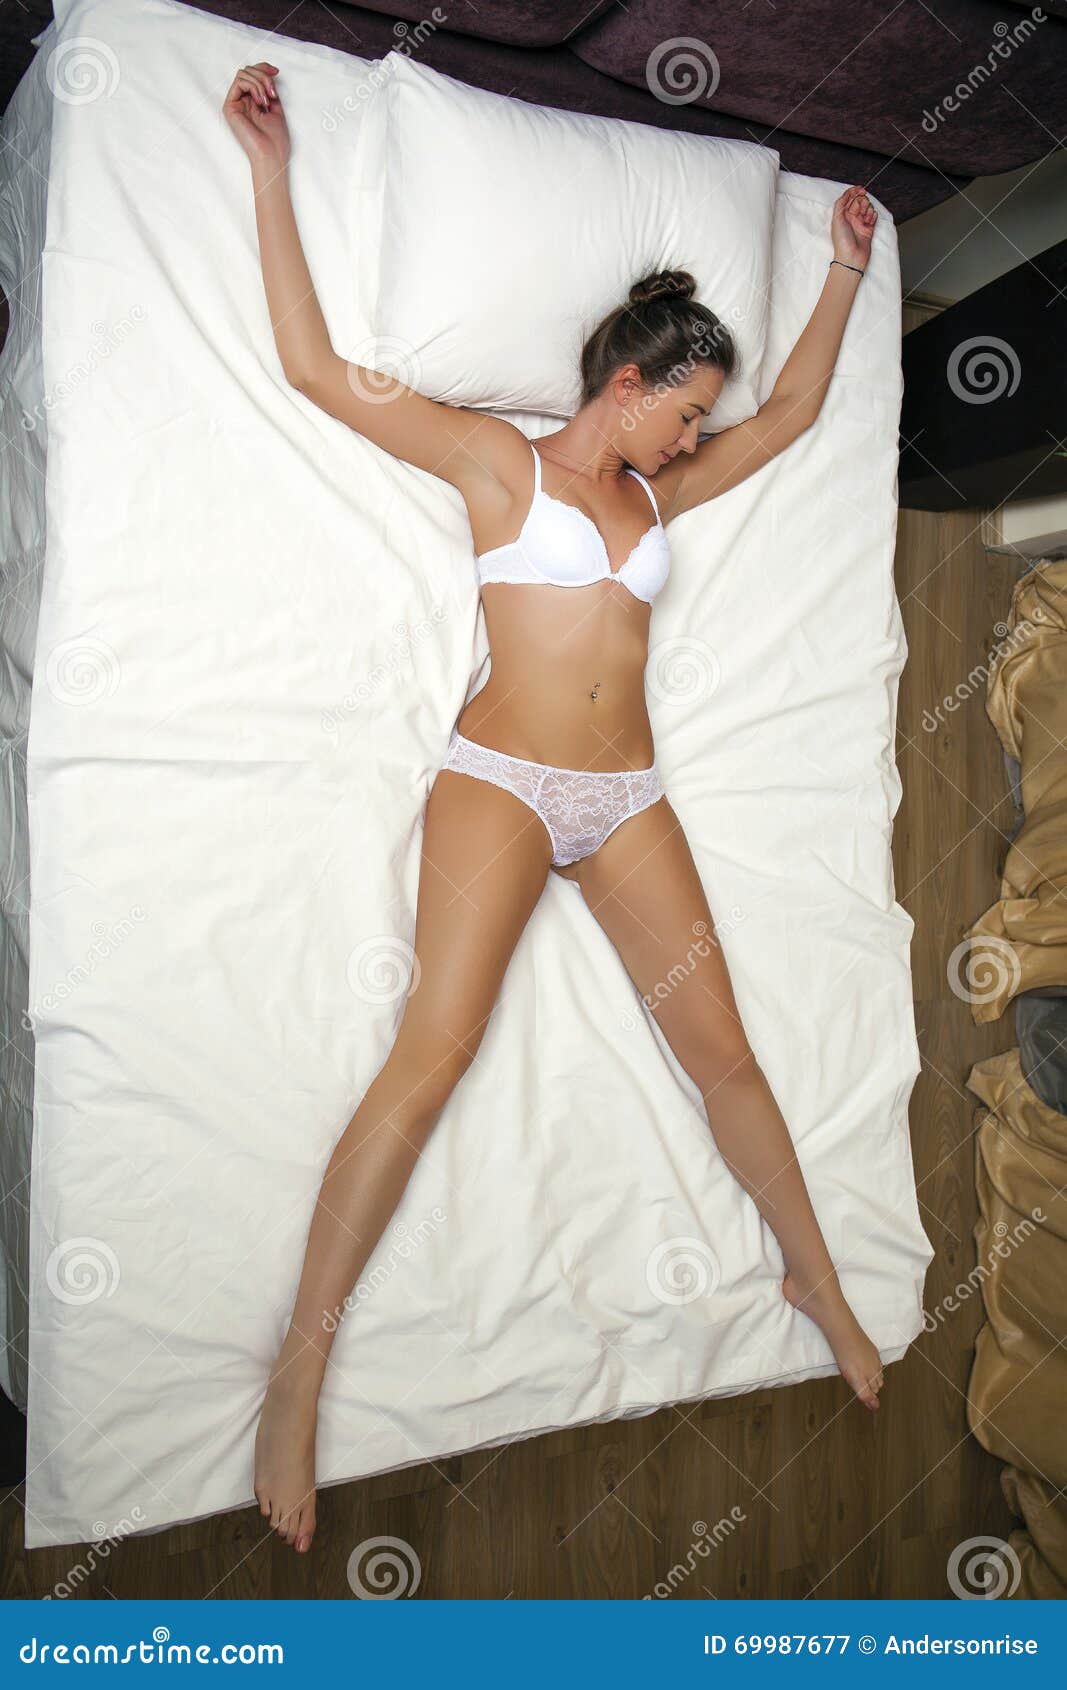 Sleeping Positions. Young Woman in White Underwear Sleeping Stock